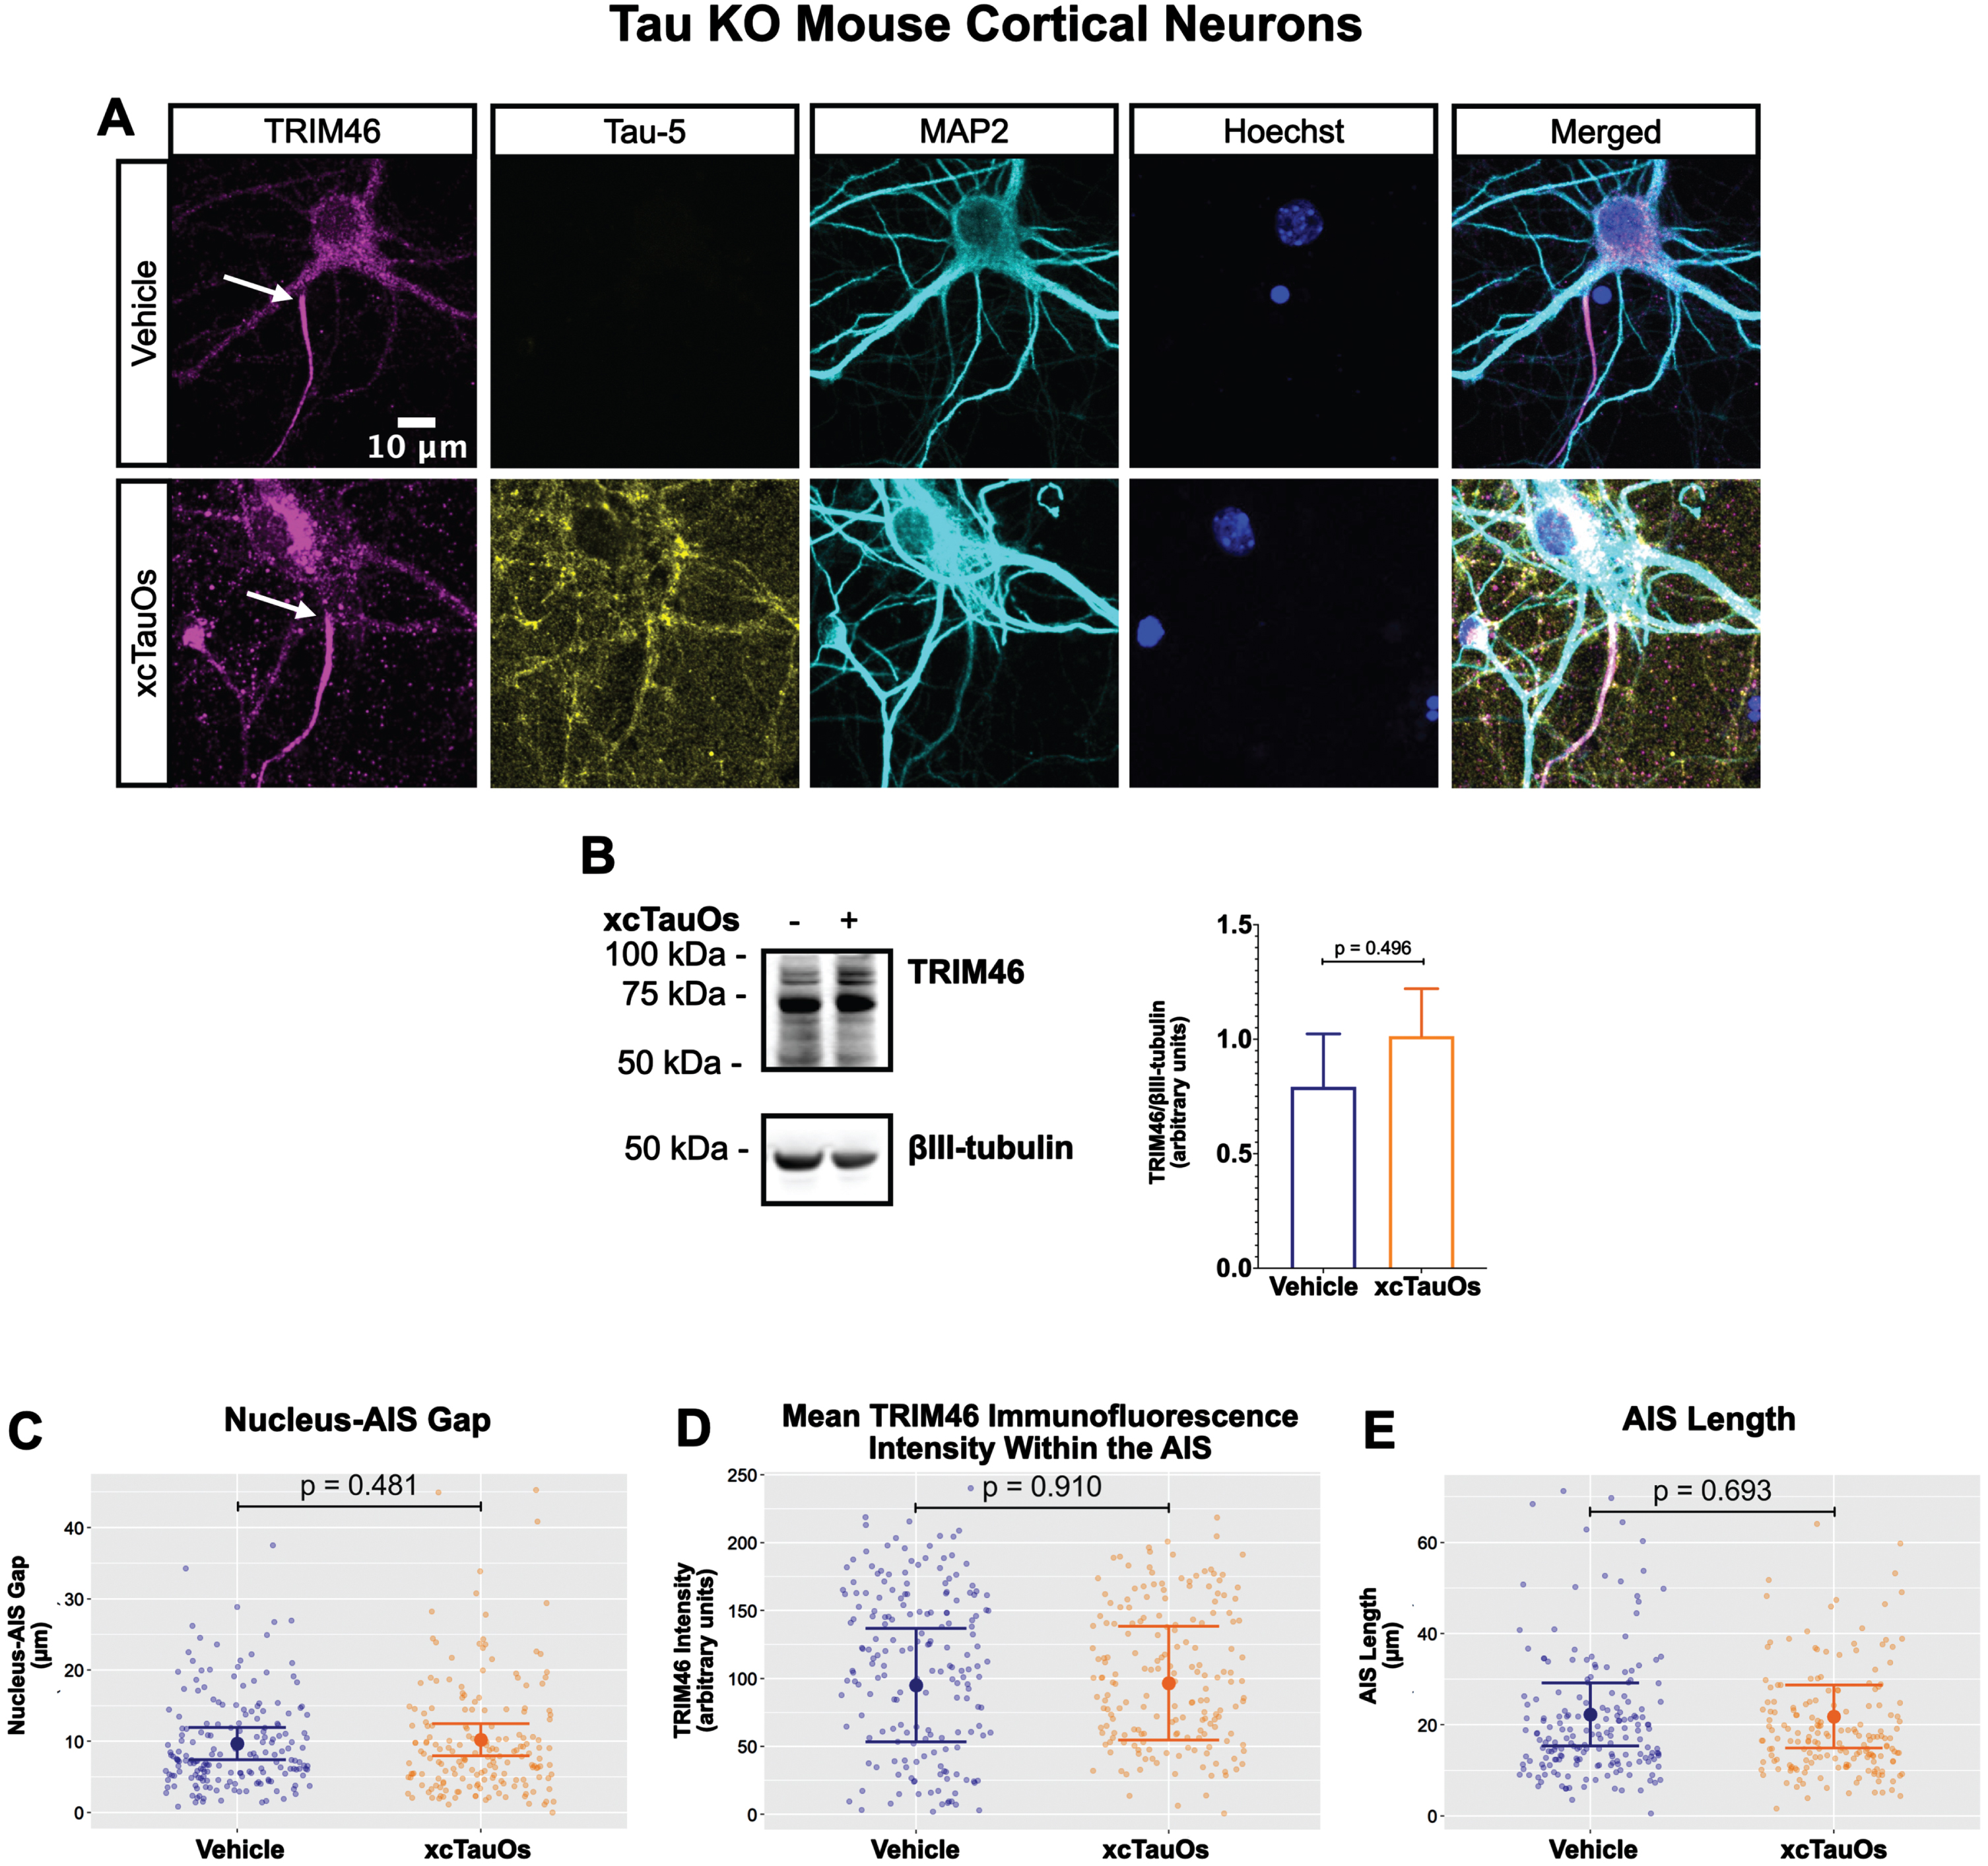 xcTauOs do not affect the AIS in tau KO neurons. A) Localization of TRIM46 (white arrows indicate proximal AIS ends), tau (Tau-5), somatodendritic compartment (MAP2), and nuclei (Hoechst) in primary tau KO mouse cortical neuron cultures. B) Quantitative western blotting of unfractionated tau KO cultures probed with anti-TRIM46, and as a loading control, the neuron-specific anti-βIII-tubulin. p-values are based on two-tailed unpaired t-tests, pooled variance. Bar graph with mean and error bars represent±standard error of the mean. Plots of (C) Nucleus-AIS gap; (D) mean TRIM46 immunofluorescence intensity within the AIS, a surrogate measure of TRIM46 concentration; and (E) AIS length. Graph data were measured from 5-6 biological replicates (independent neuronal culture preparations). Immunofluorescence was performed with 1 technical replicate (independent coverslip) each, which accounted for a total of ∼184 neurons per treatment condition (vehicle or xcTauOs). p-values from mixed model linear regression are indicated. Large dot indicates the predicted mean and error bars represent the 95% confidence interval.